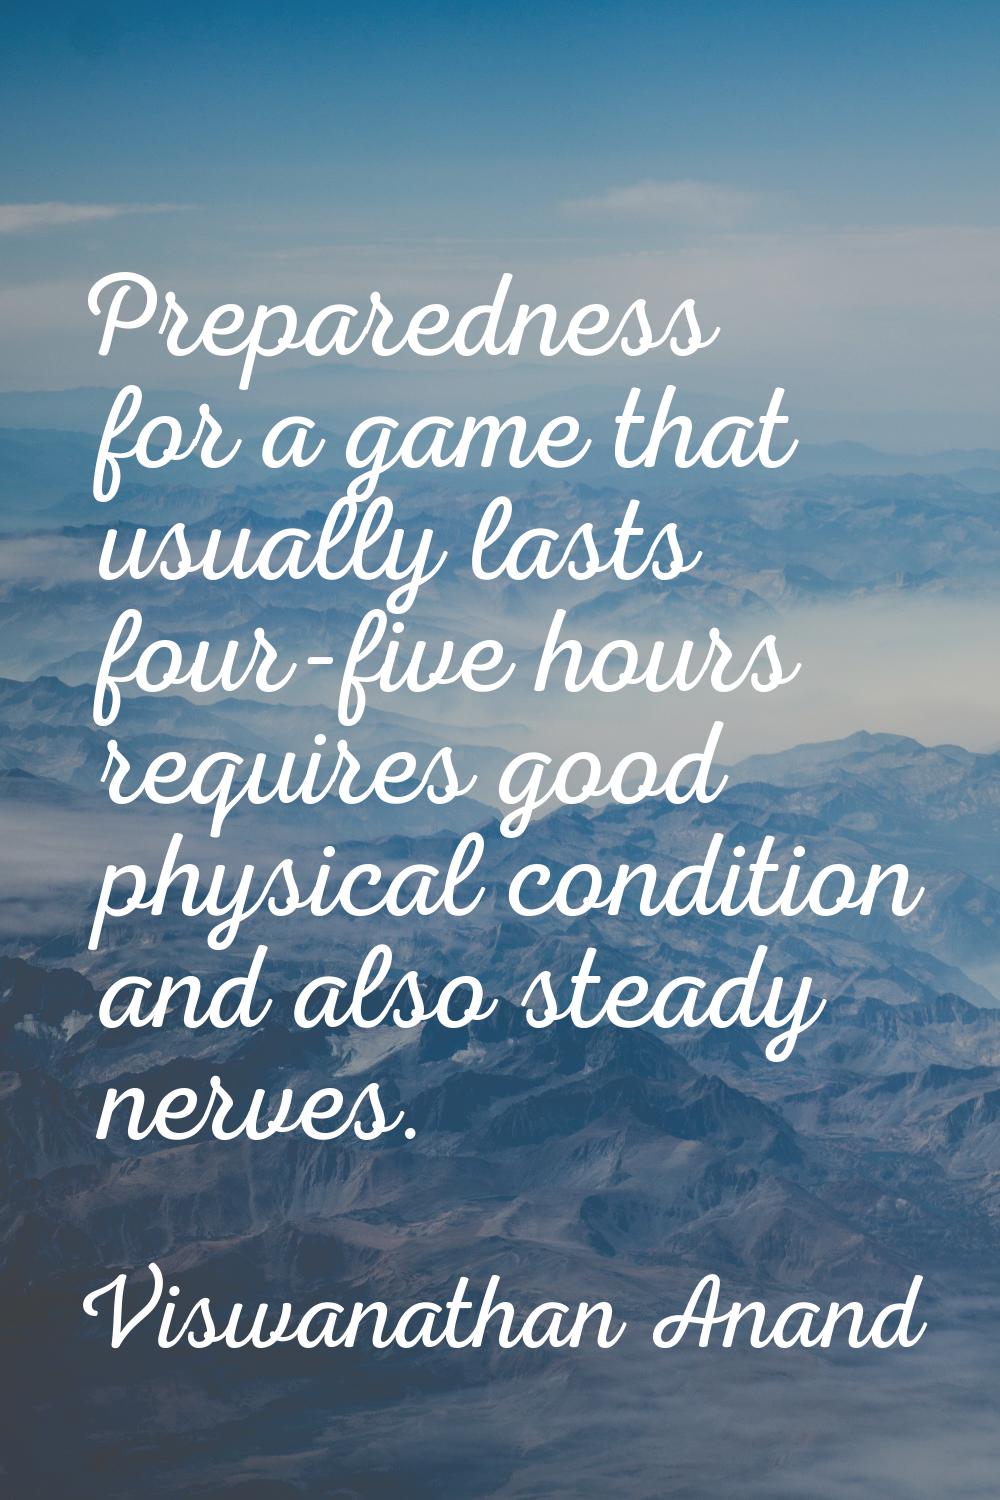 Preparedness for a game that usually lasts four-five hours requires good physical condition and als